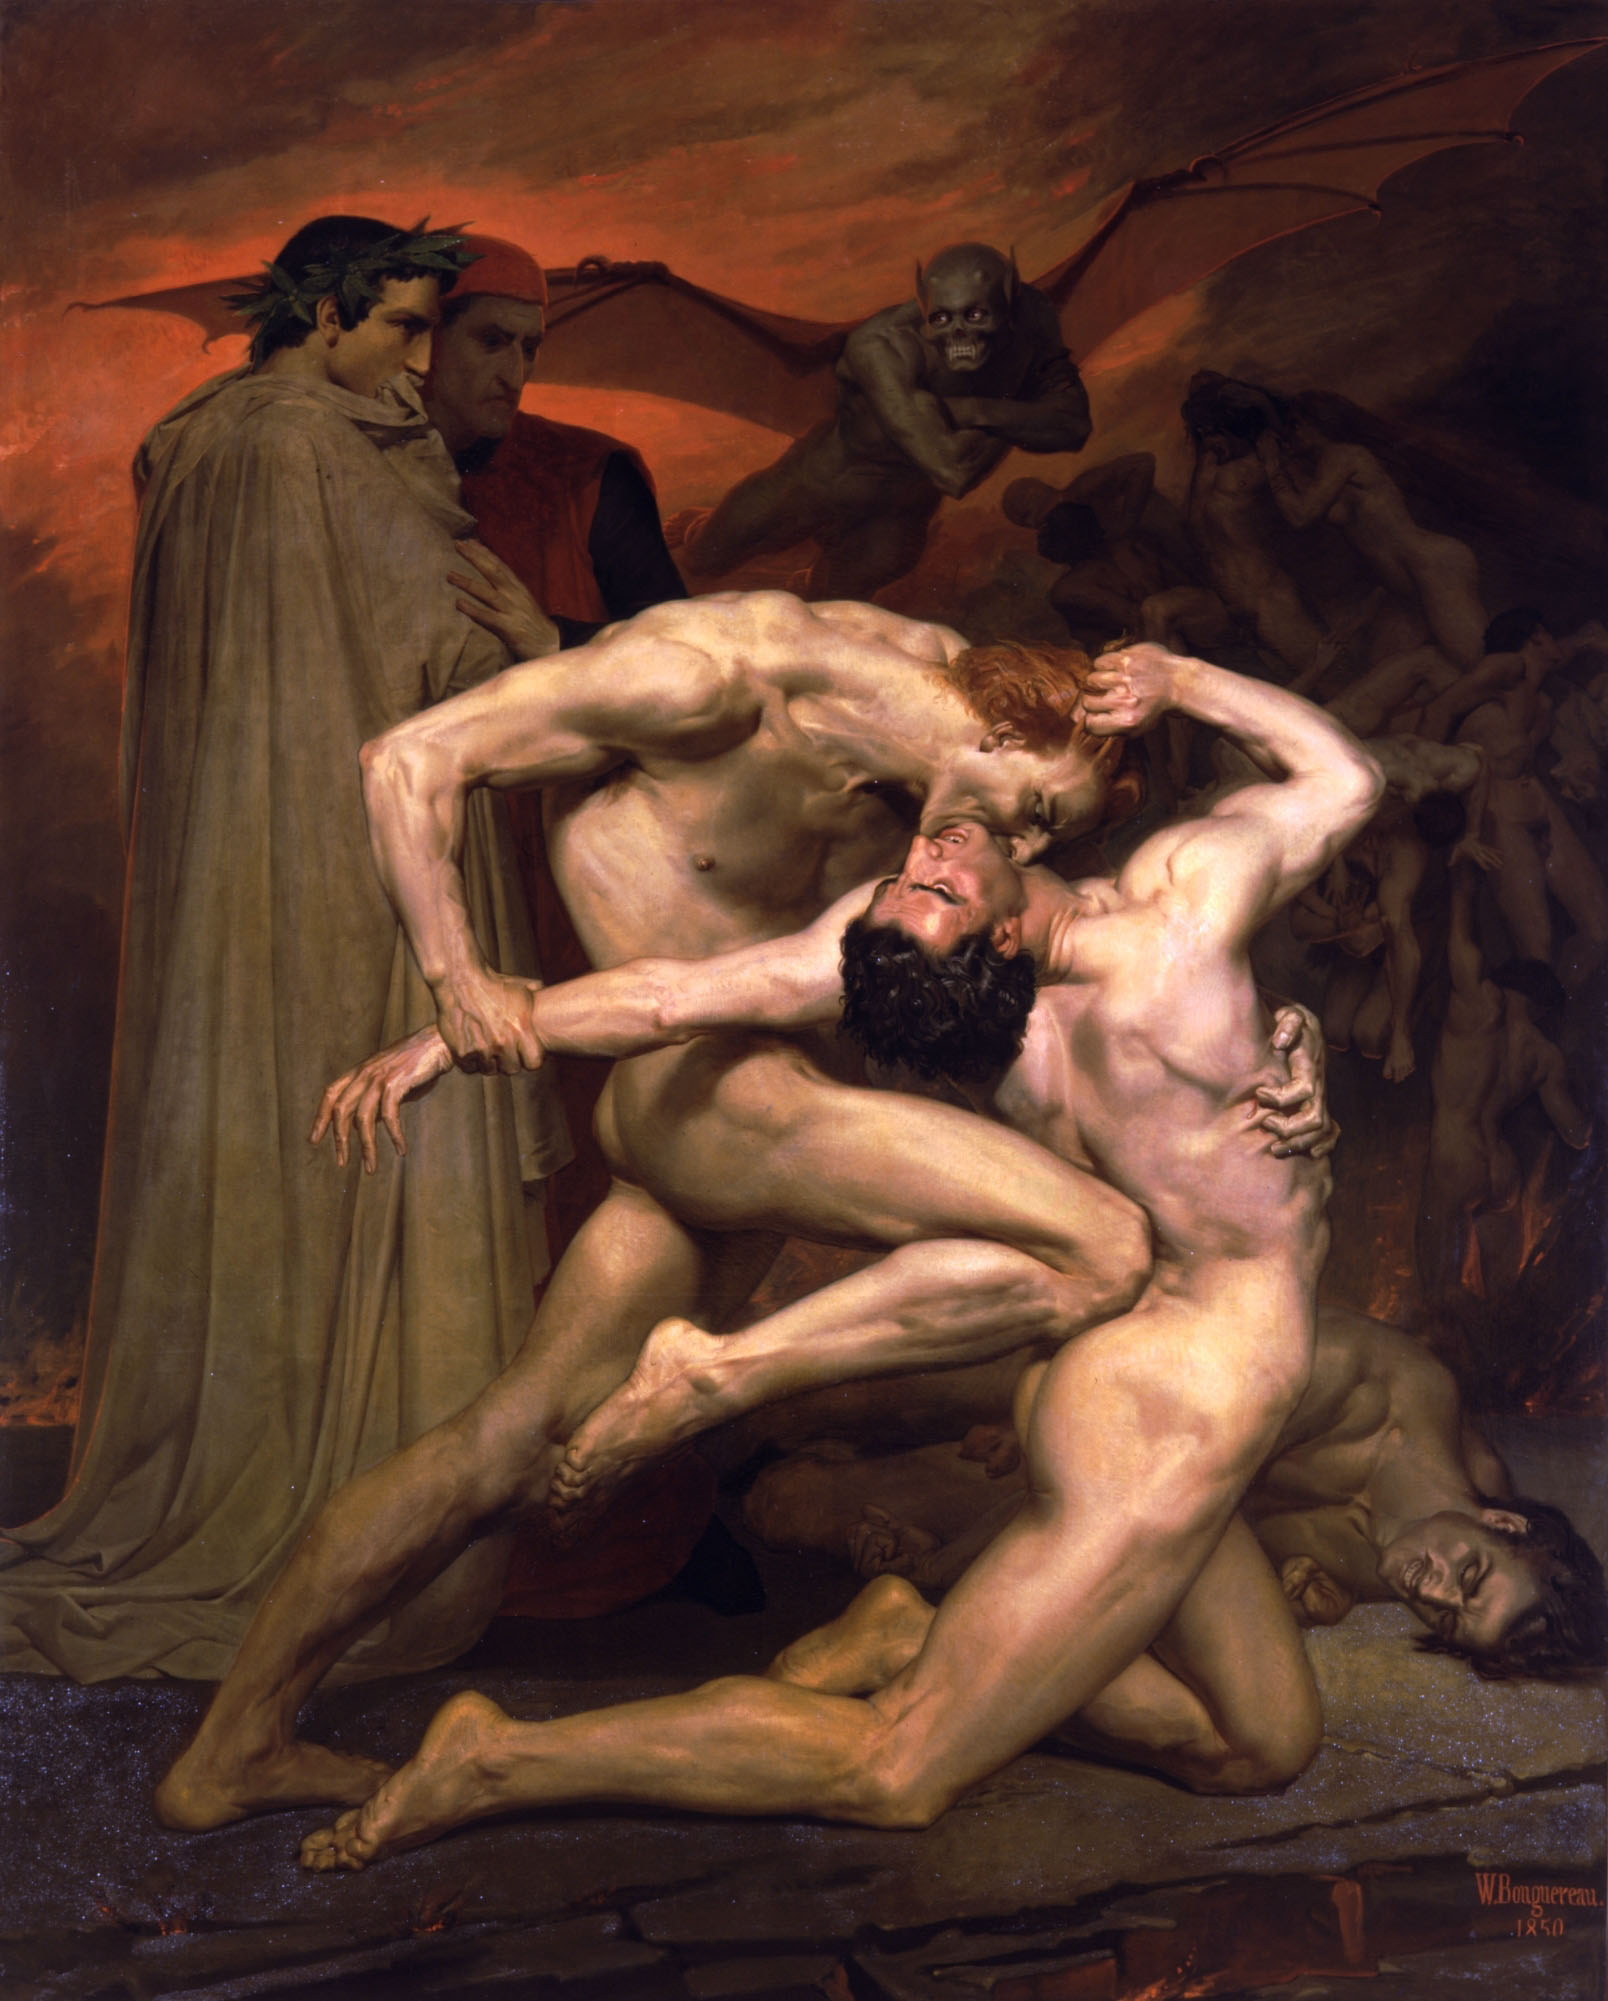 William-Adolphe Bouguereau (1825-1905) - Dante And Virgil In Hell